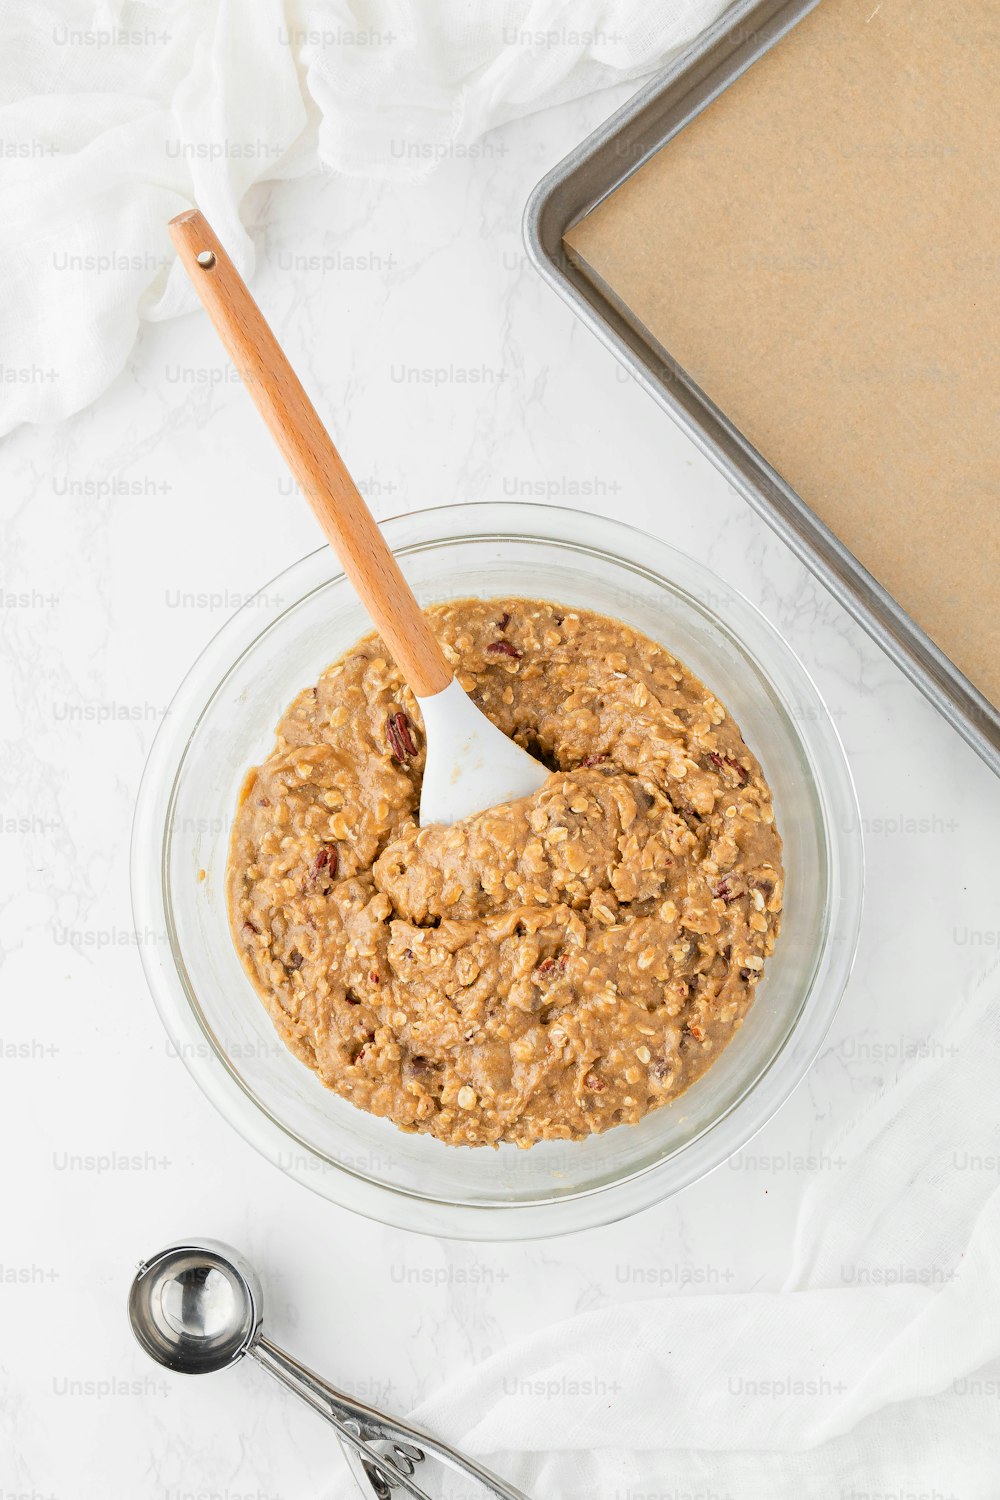 a bowl of oatmeal with a wooden spoon